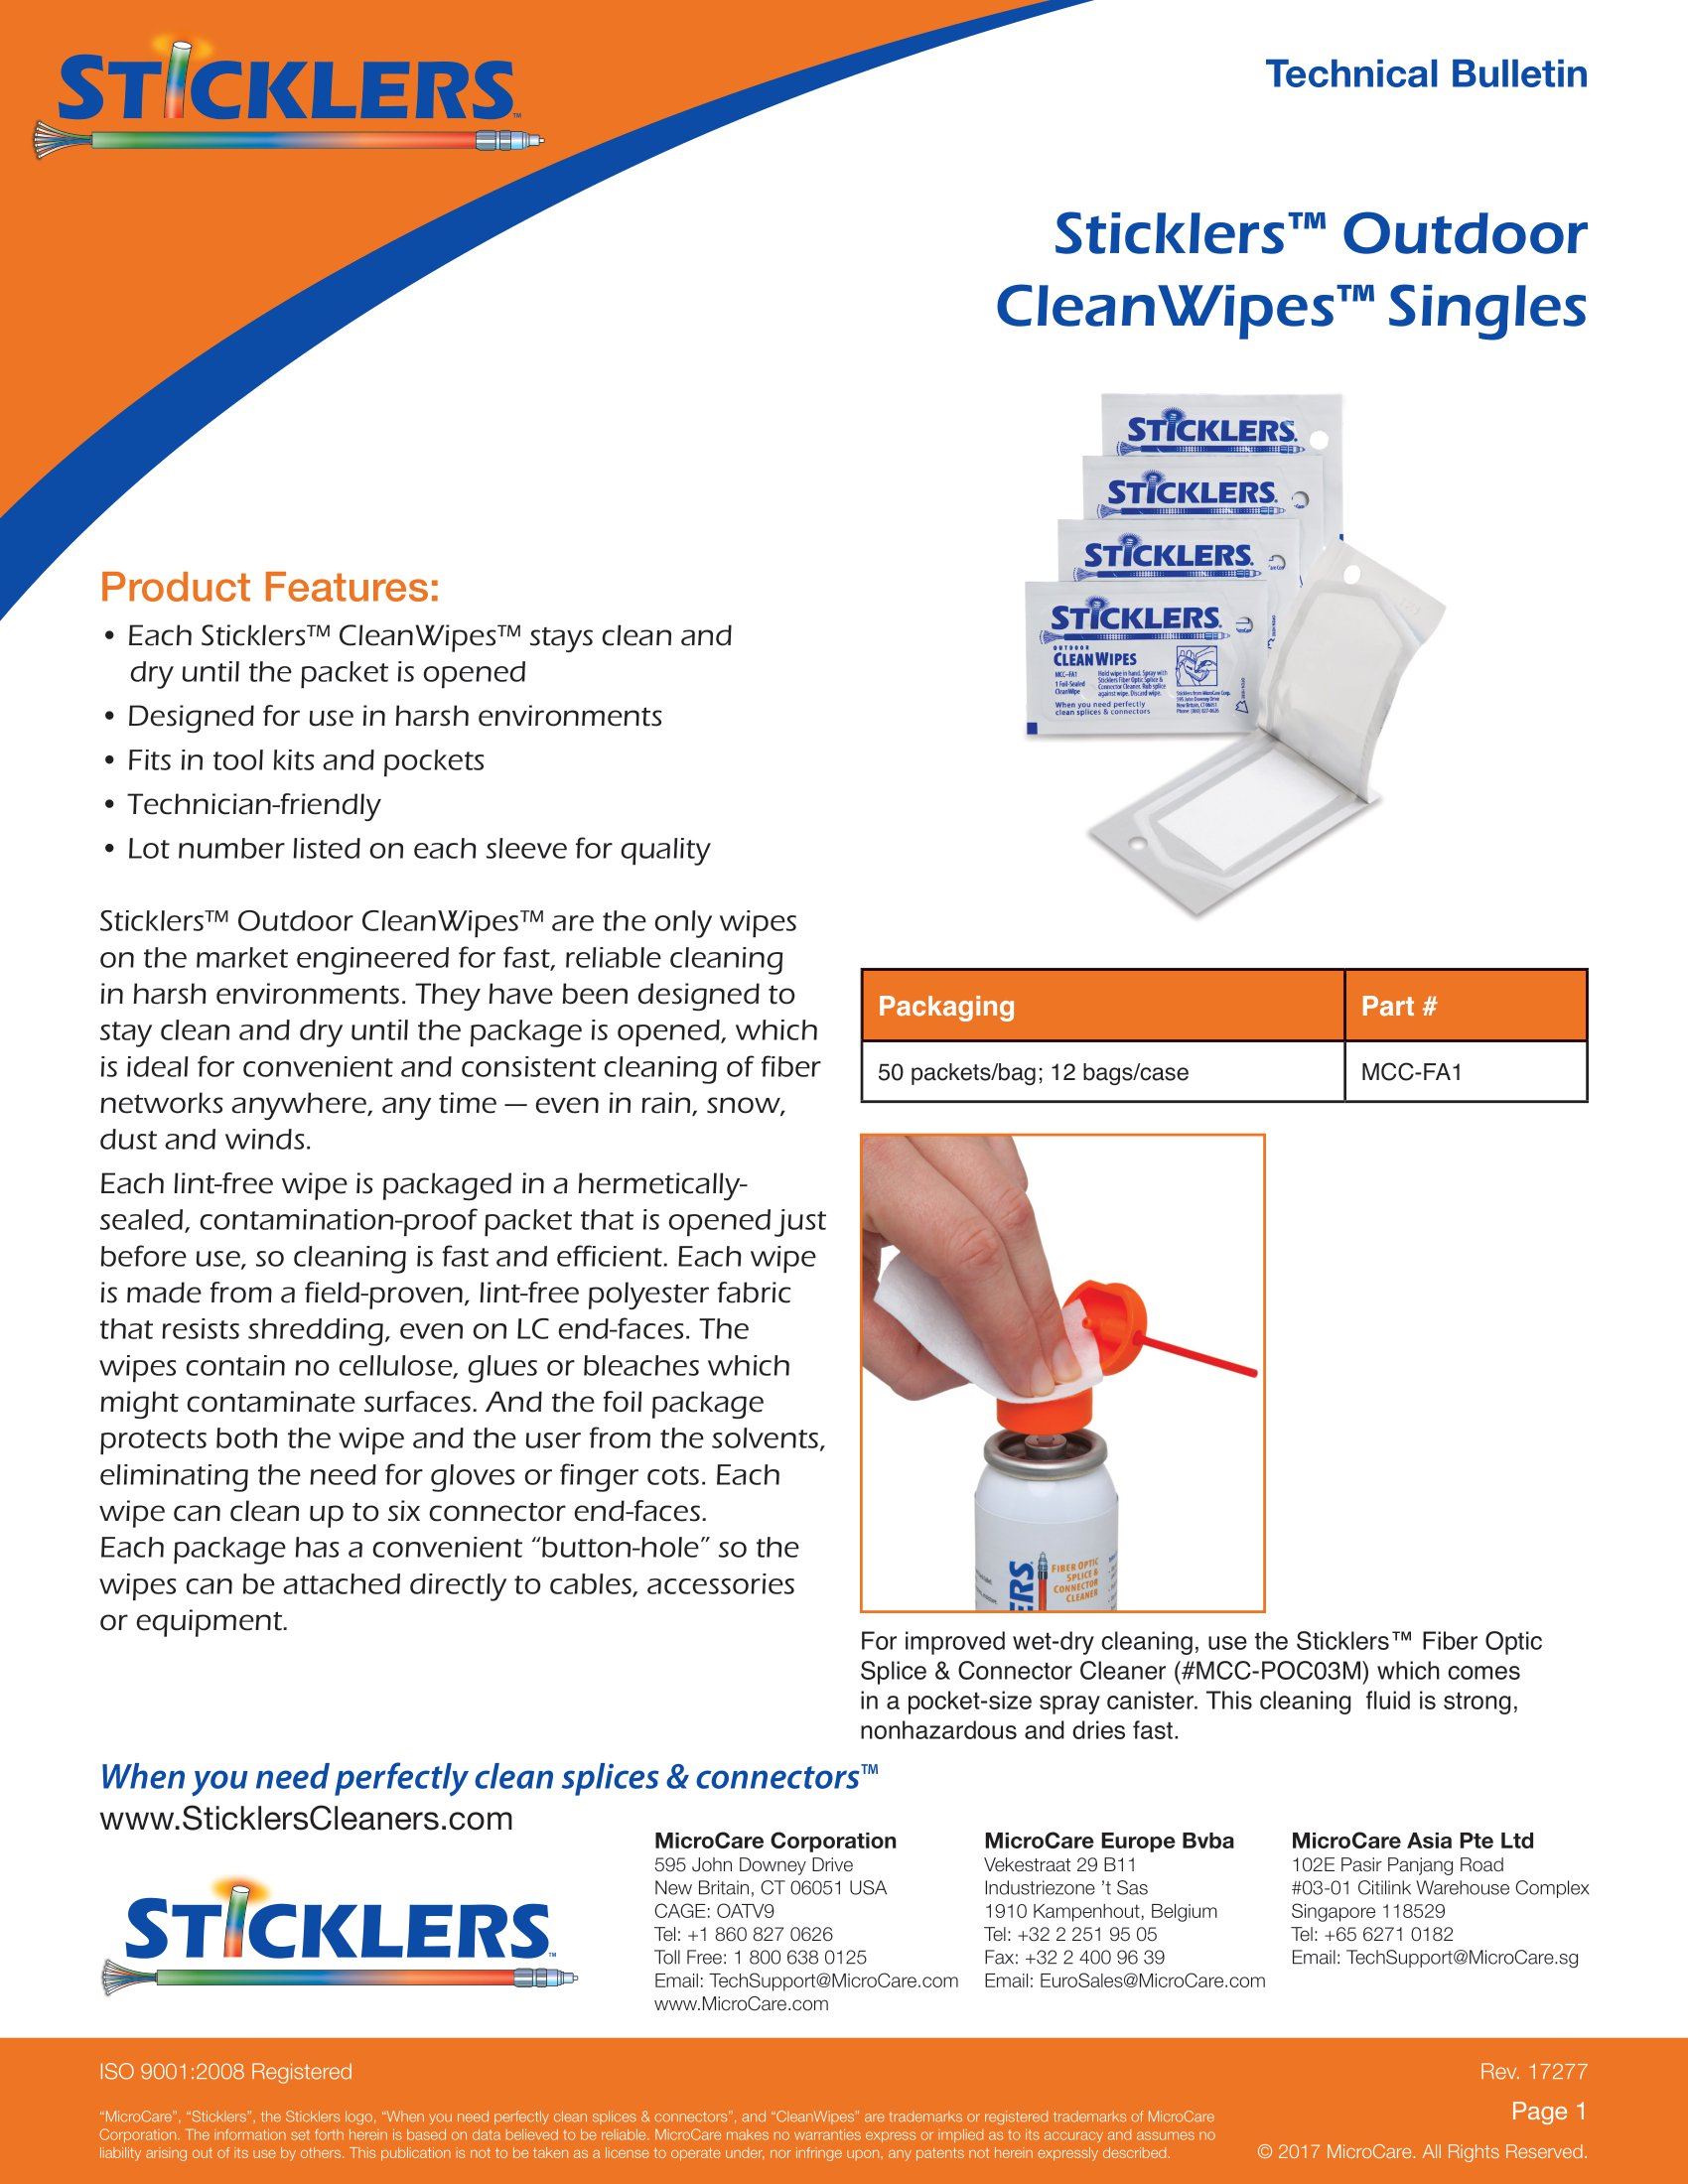 MCC-FA1 CleanWipes for Harsh Environments (NSN 6850-01-5929408)